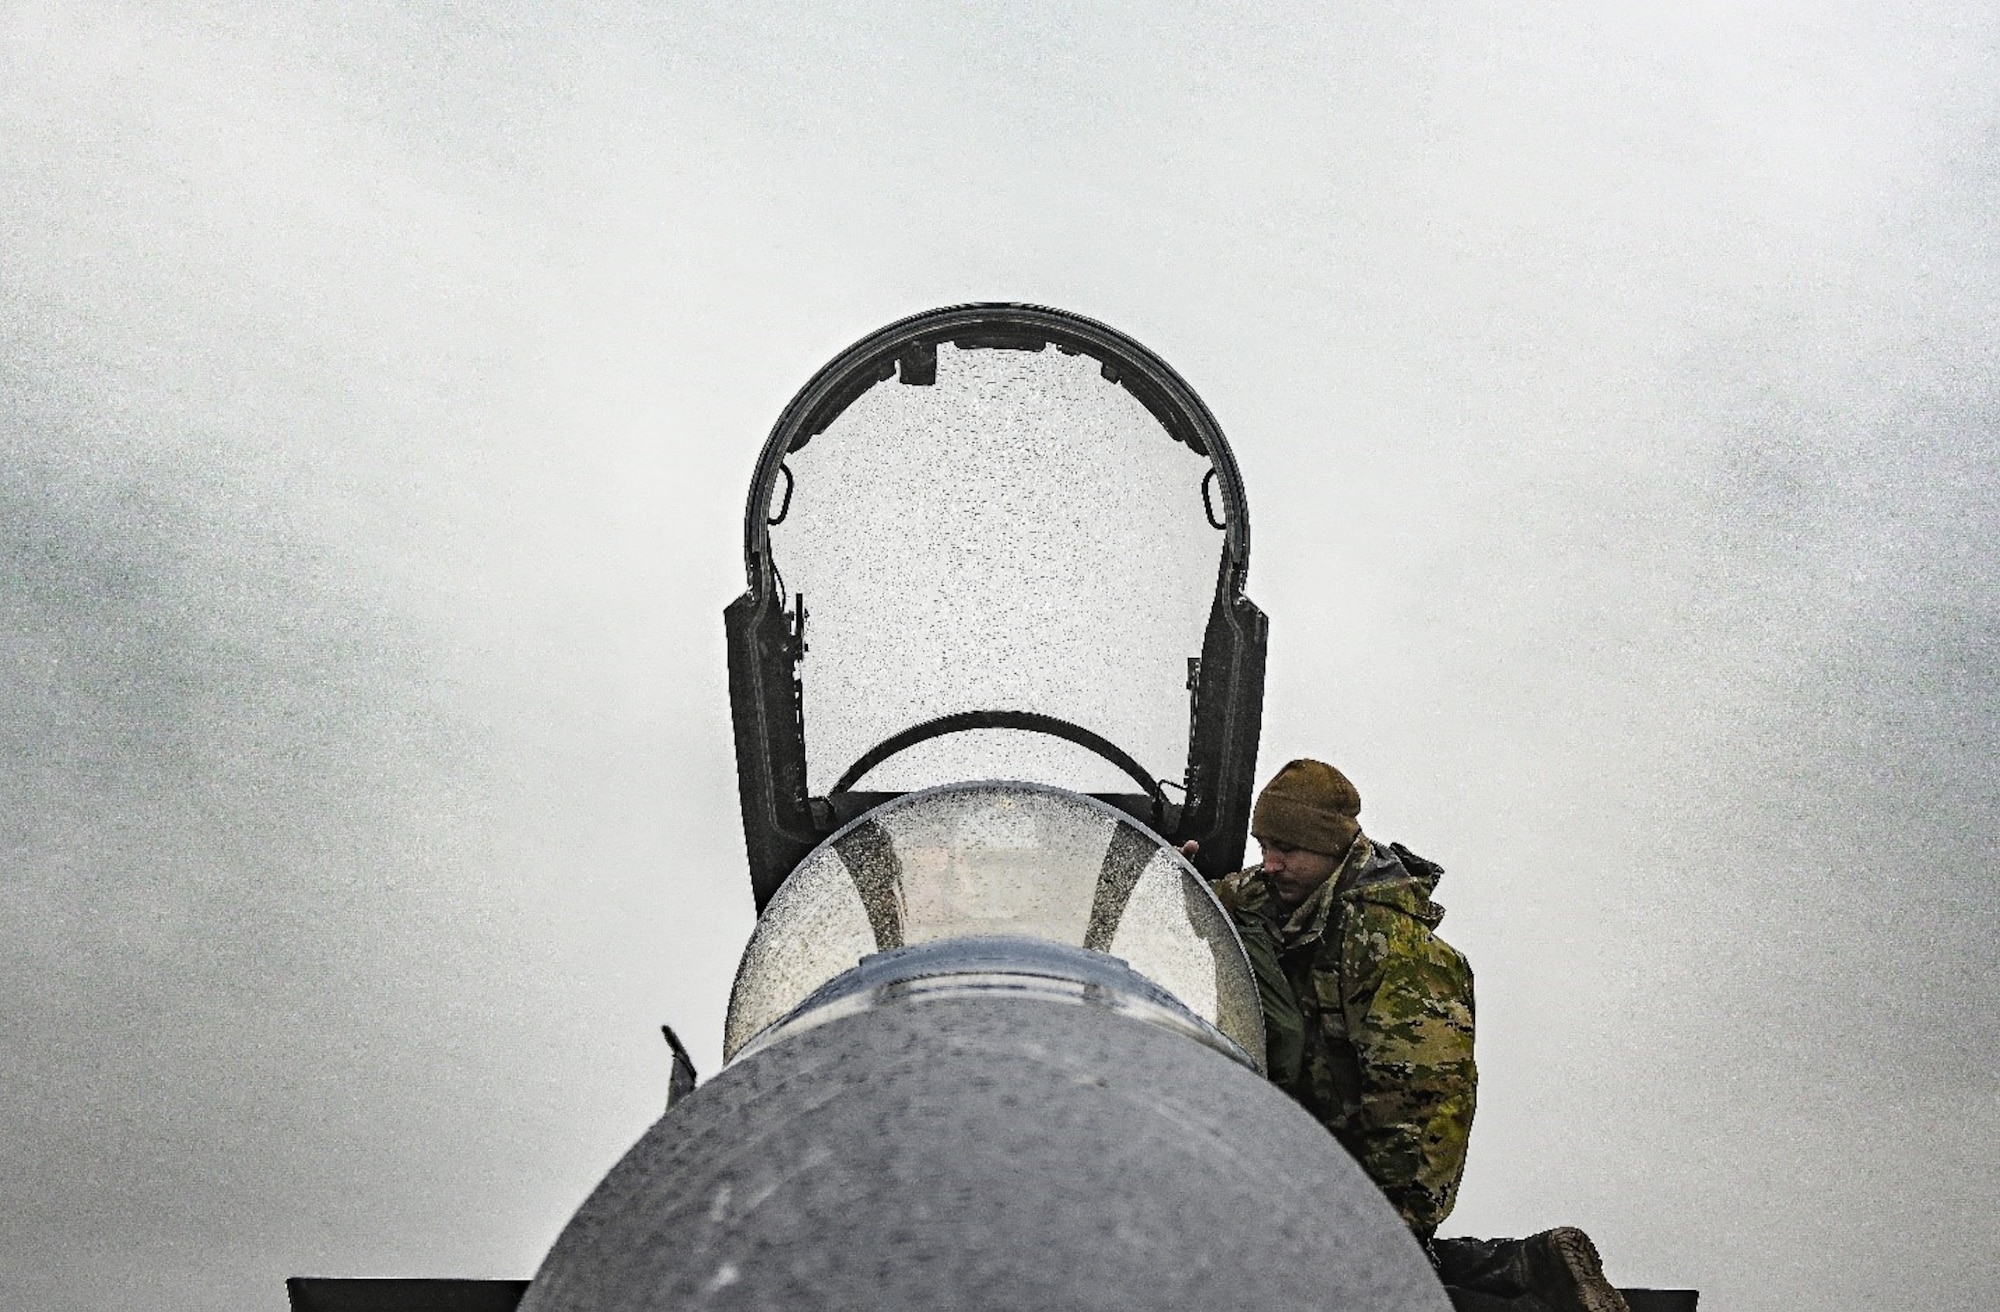 An Airman assigned to the 18th Aircraft Maintenance Squadron performs pre-flight checks on an F-35A Lightning II ahead of a flying mission Aug. 16, 2021, at Eielson Air Force Base, Alaska. The flying mission was part of a Red Flag exercise designed to test air combat tactics on fifth-generation aircraft. (U.S. Air Force photo by Staff Sgt. Christian Conrad)